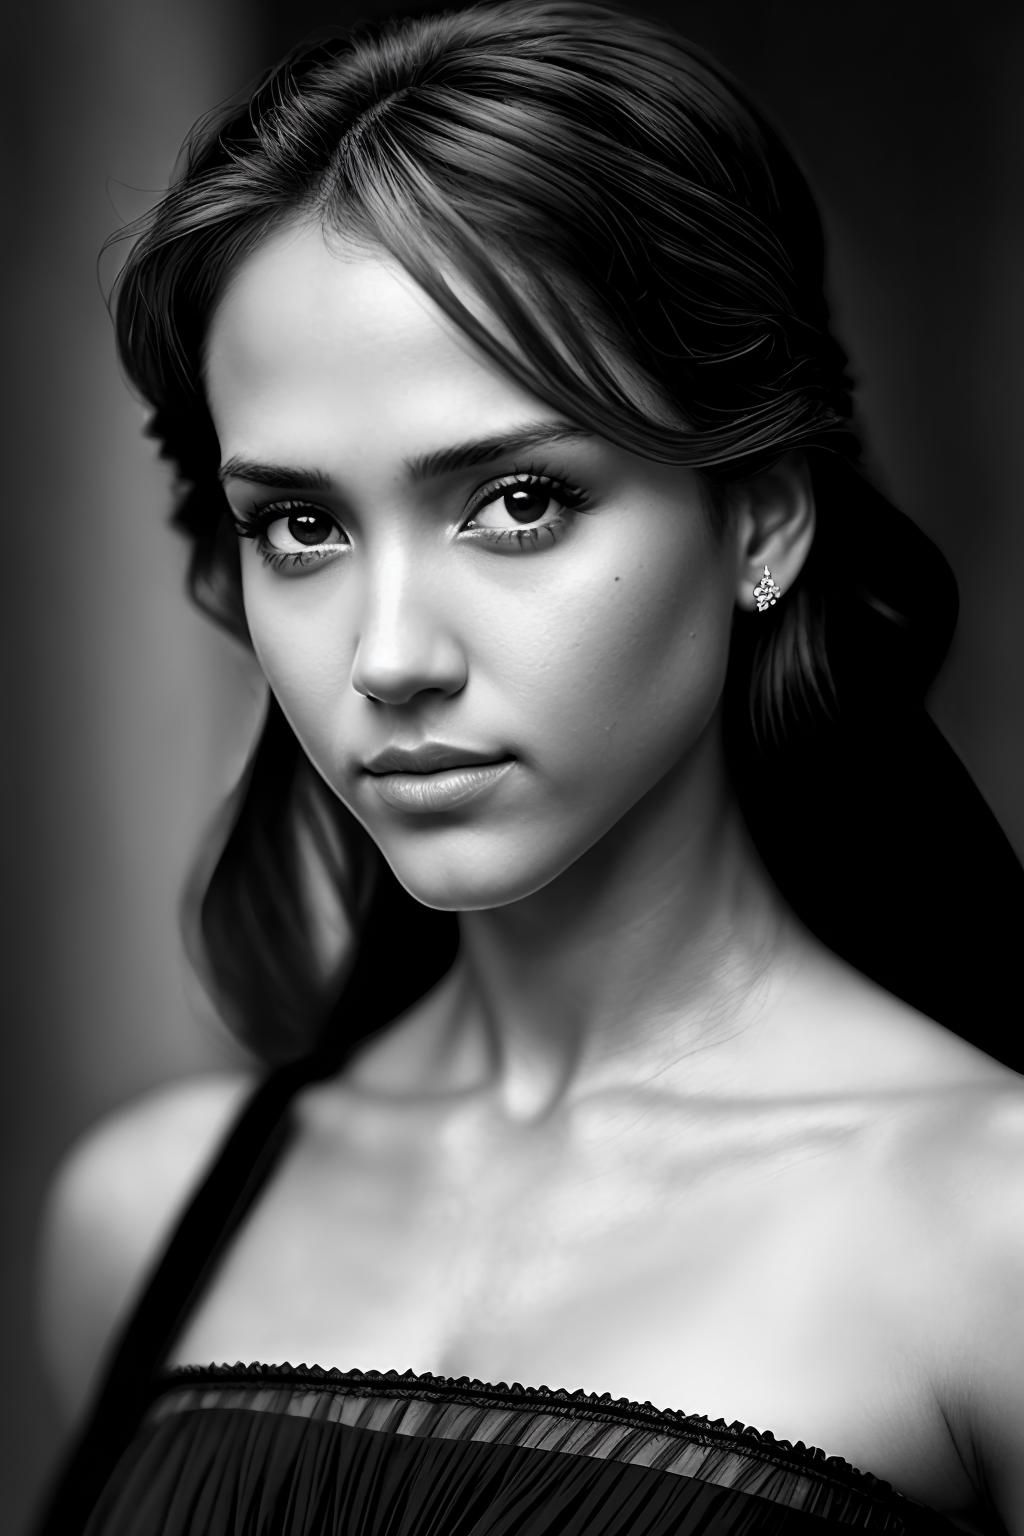 Jessica Alba image by ngsm000